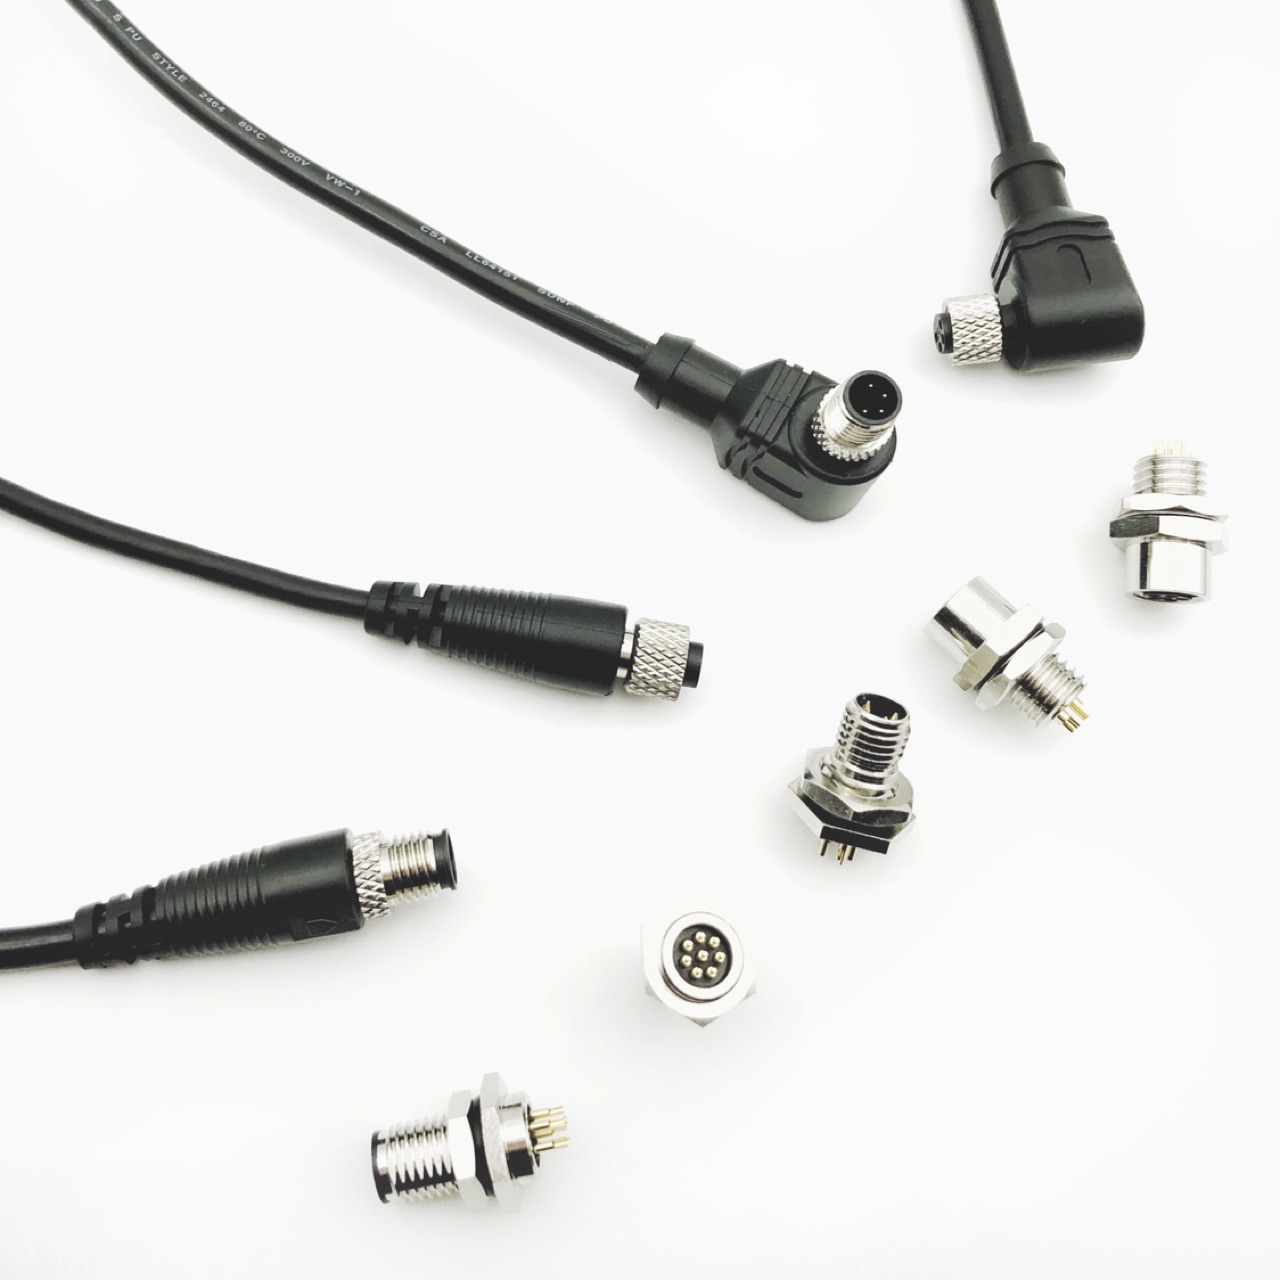 M8 Connector and Cable - Waterproof M8 panel mount connector and